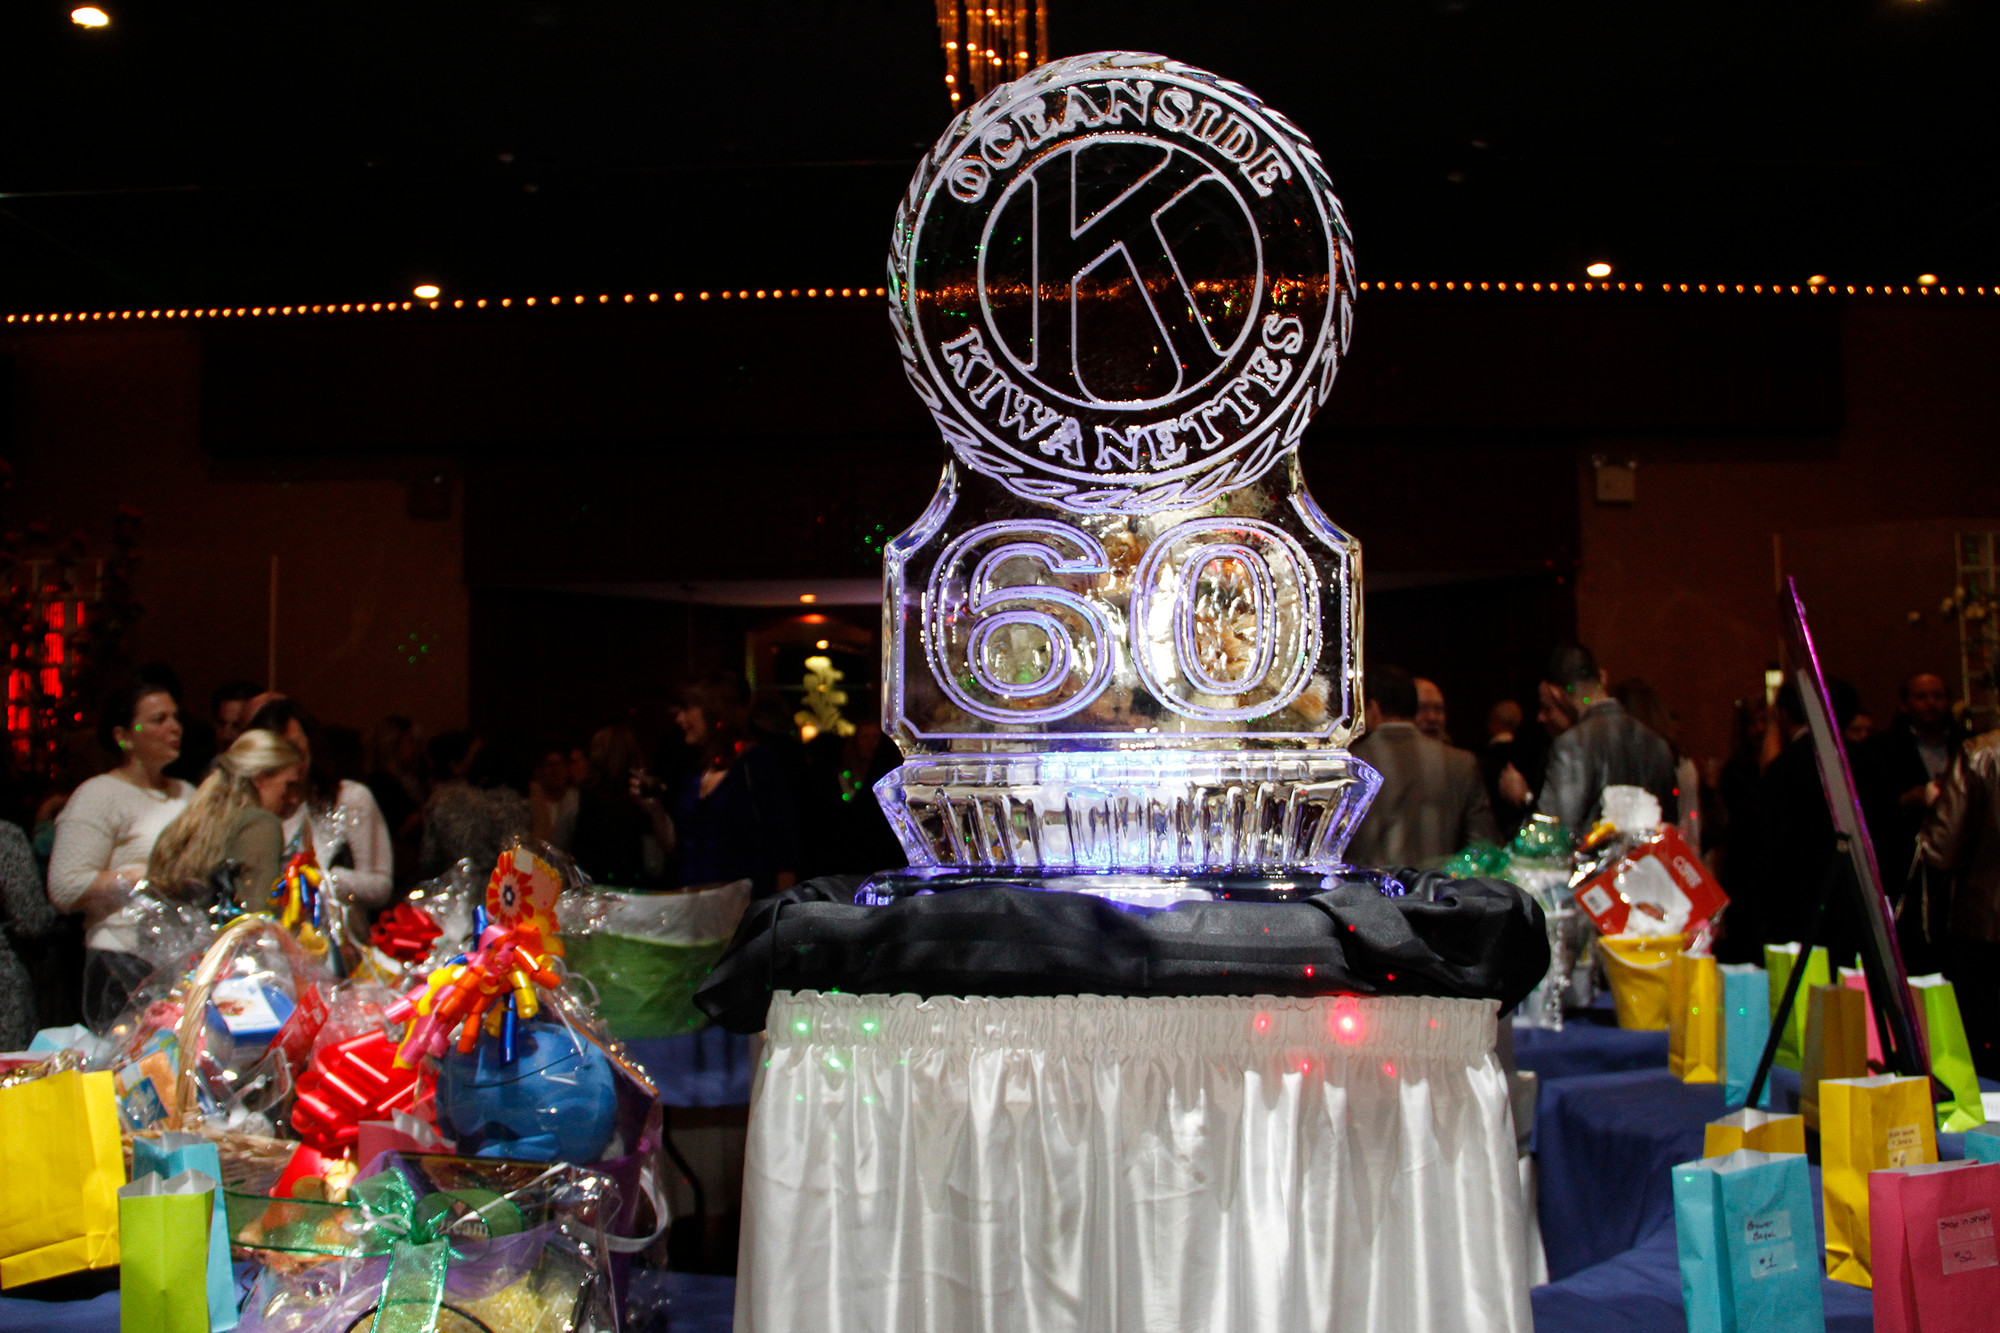 The Kiwanettes’ 60th anniversary ice sculpture.